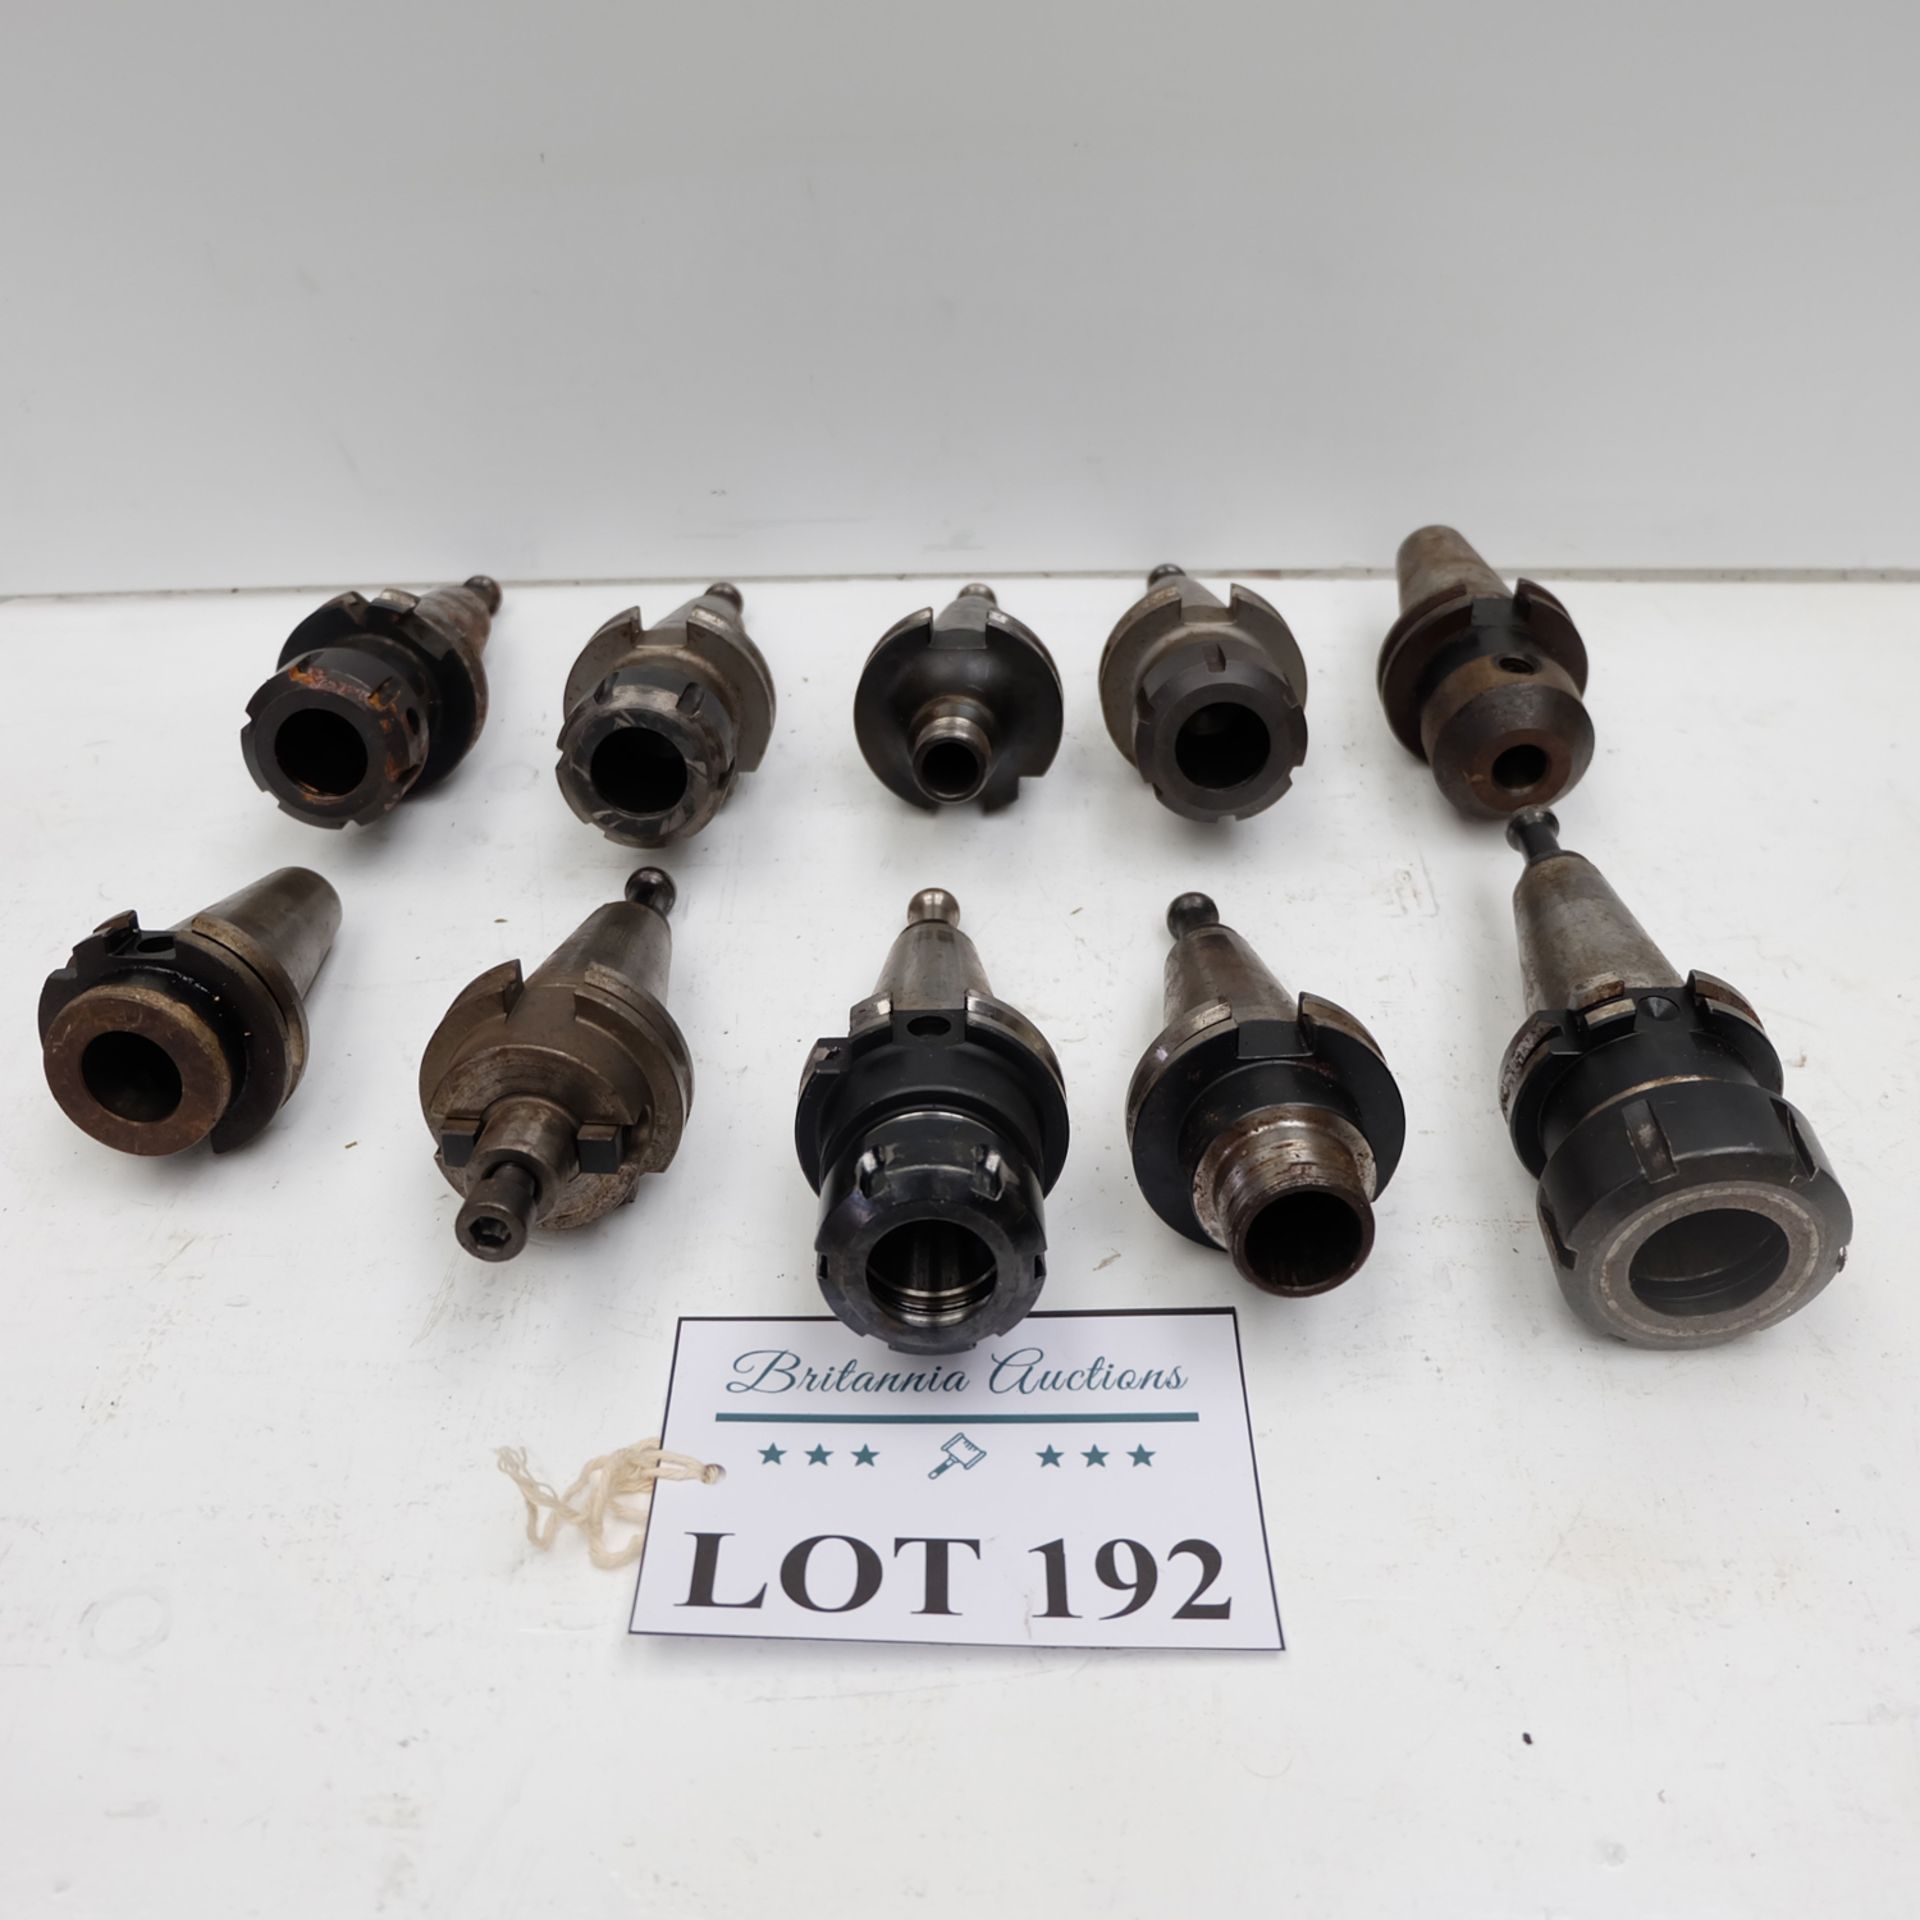 Quantity of 10 x SK40 Spindle Tooling. - Image 3 of 3